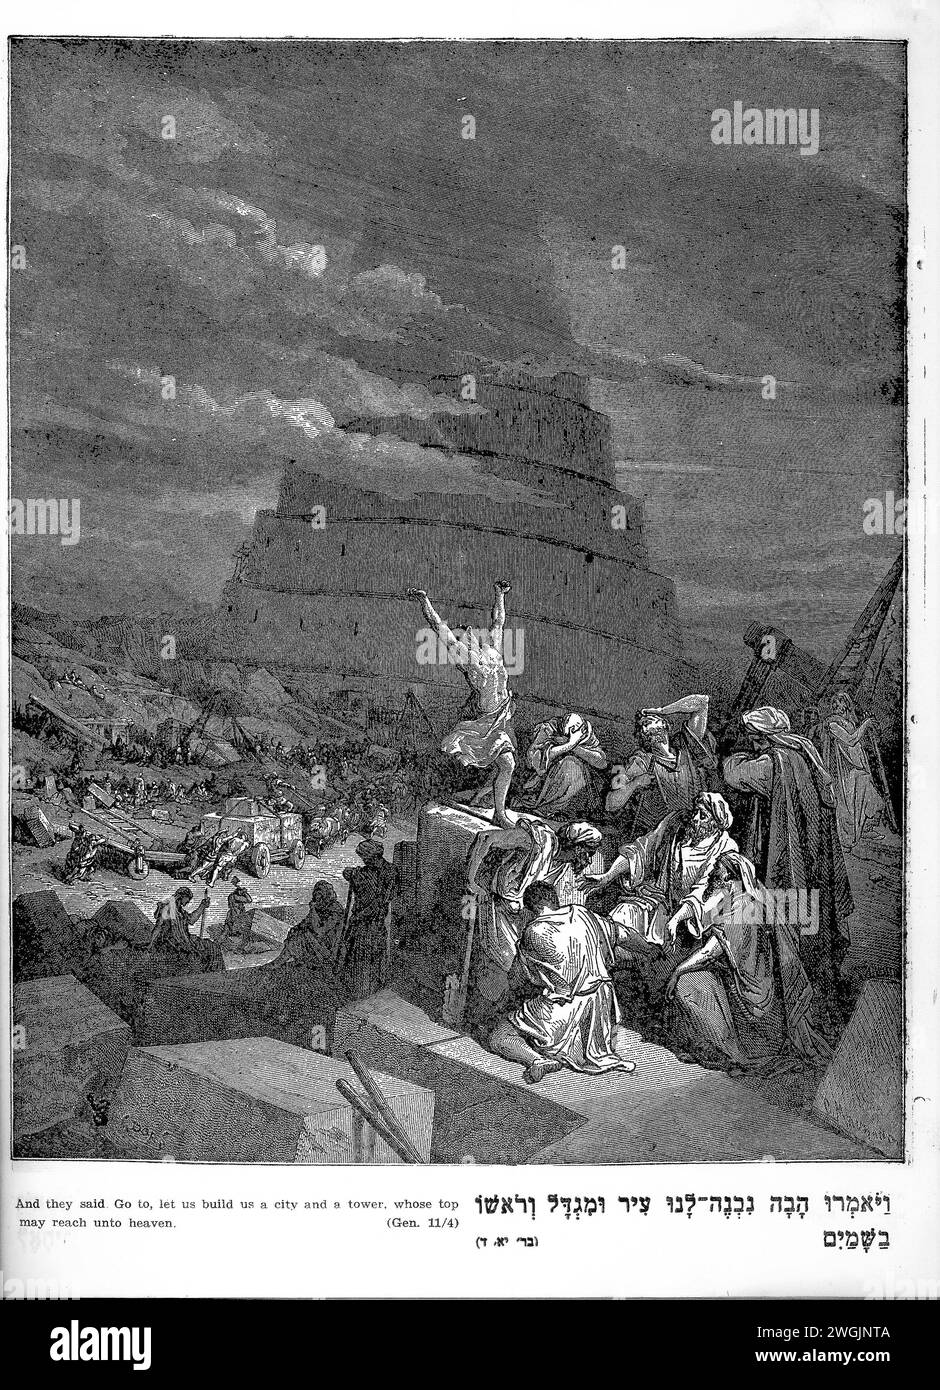 The Gustav Dore Illustrated Bible - the Old Testament and the Five Books of Moses in pictures a pre-1944 printing by a Tel Aviv publisher with traditional  Hebrew script captions to each illustration. Stock Photo